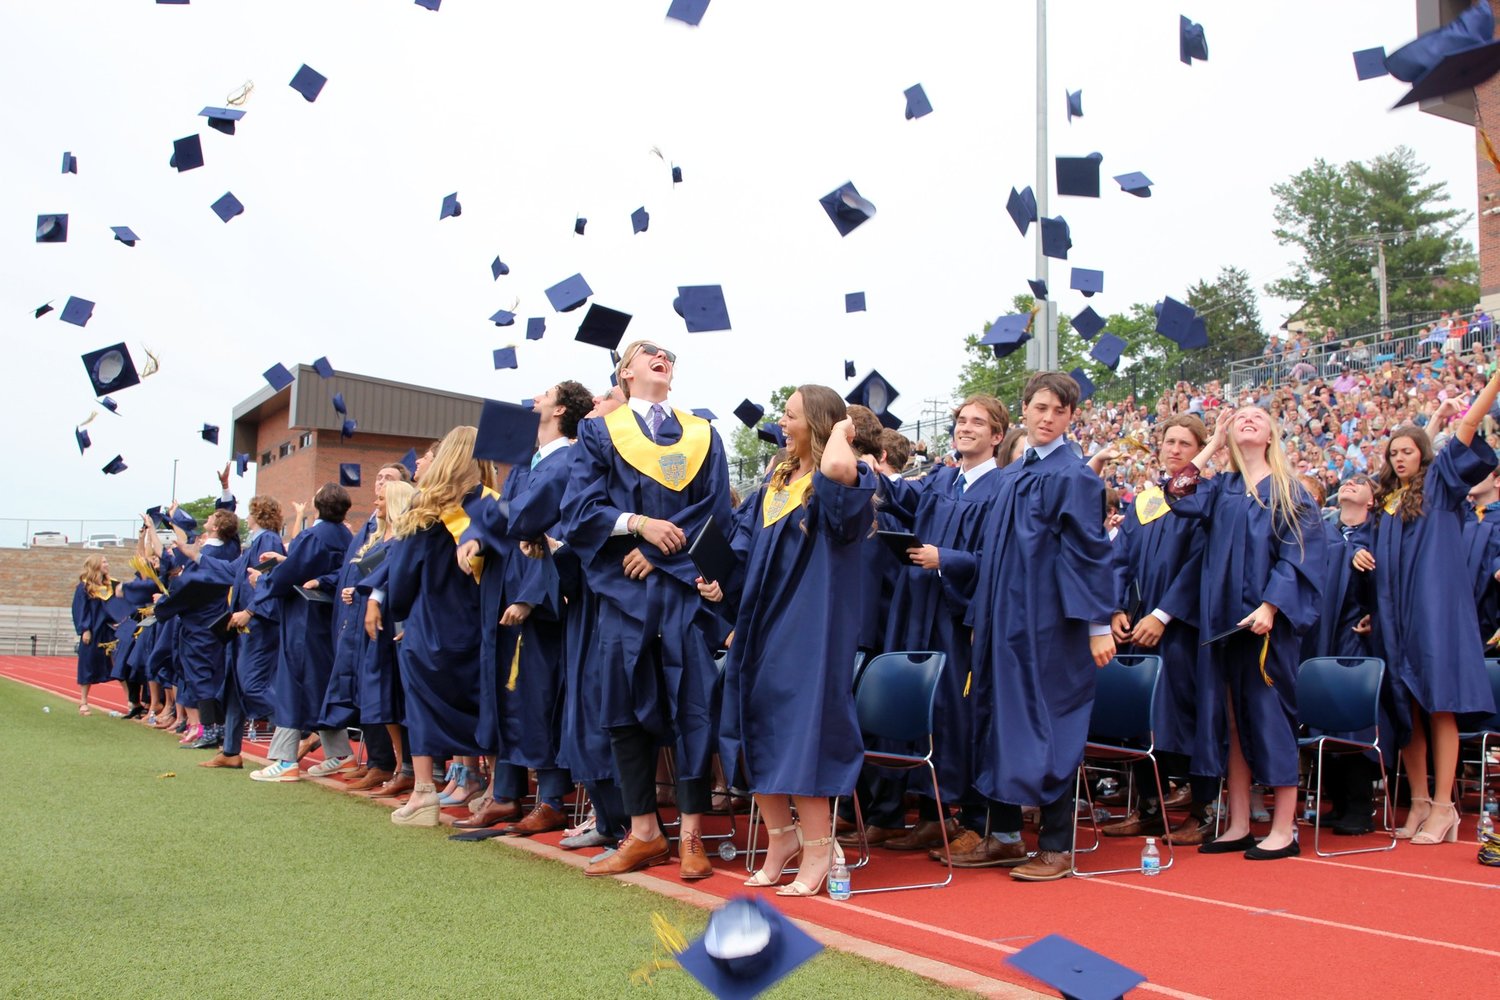 Members of Helias Catholic High School’s graduating Class of 2022 pitch their mortarboards into the air in celebration at the conclusion of their Commencement Exercises on May 22.